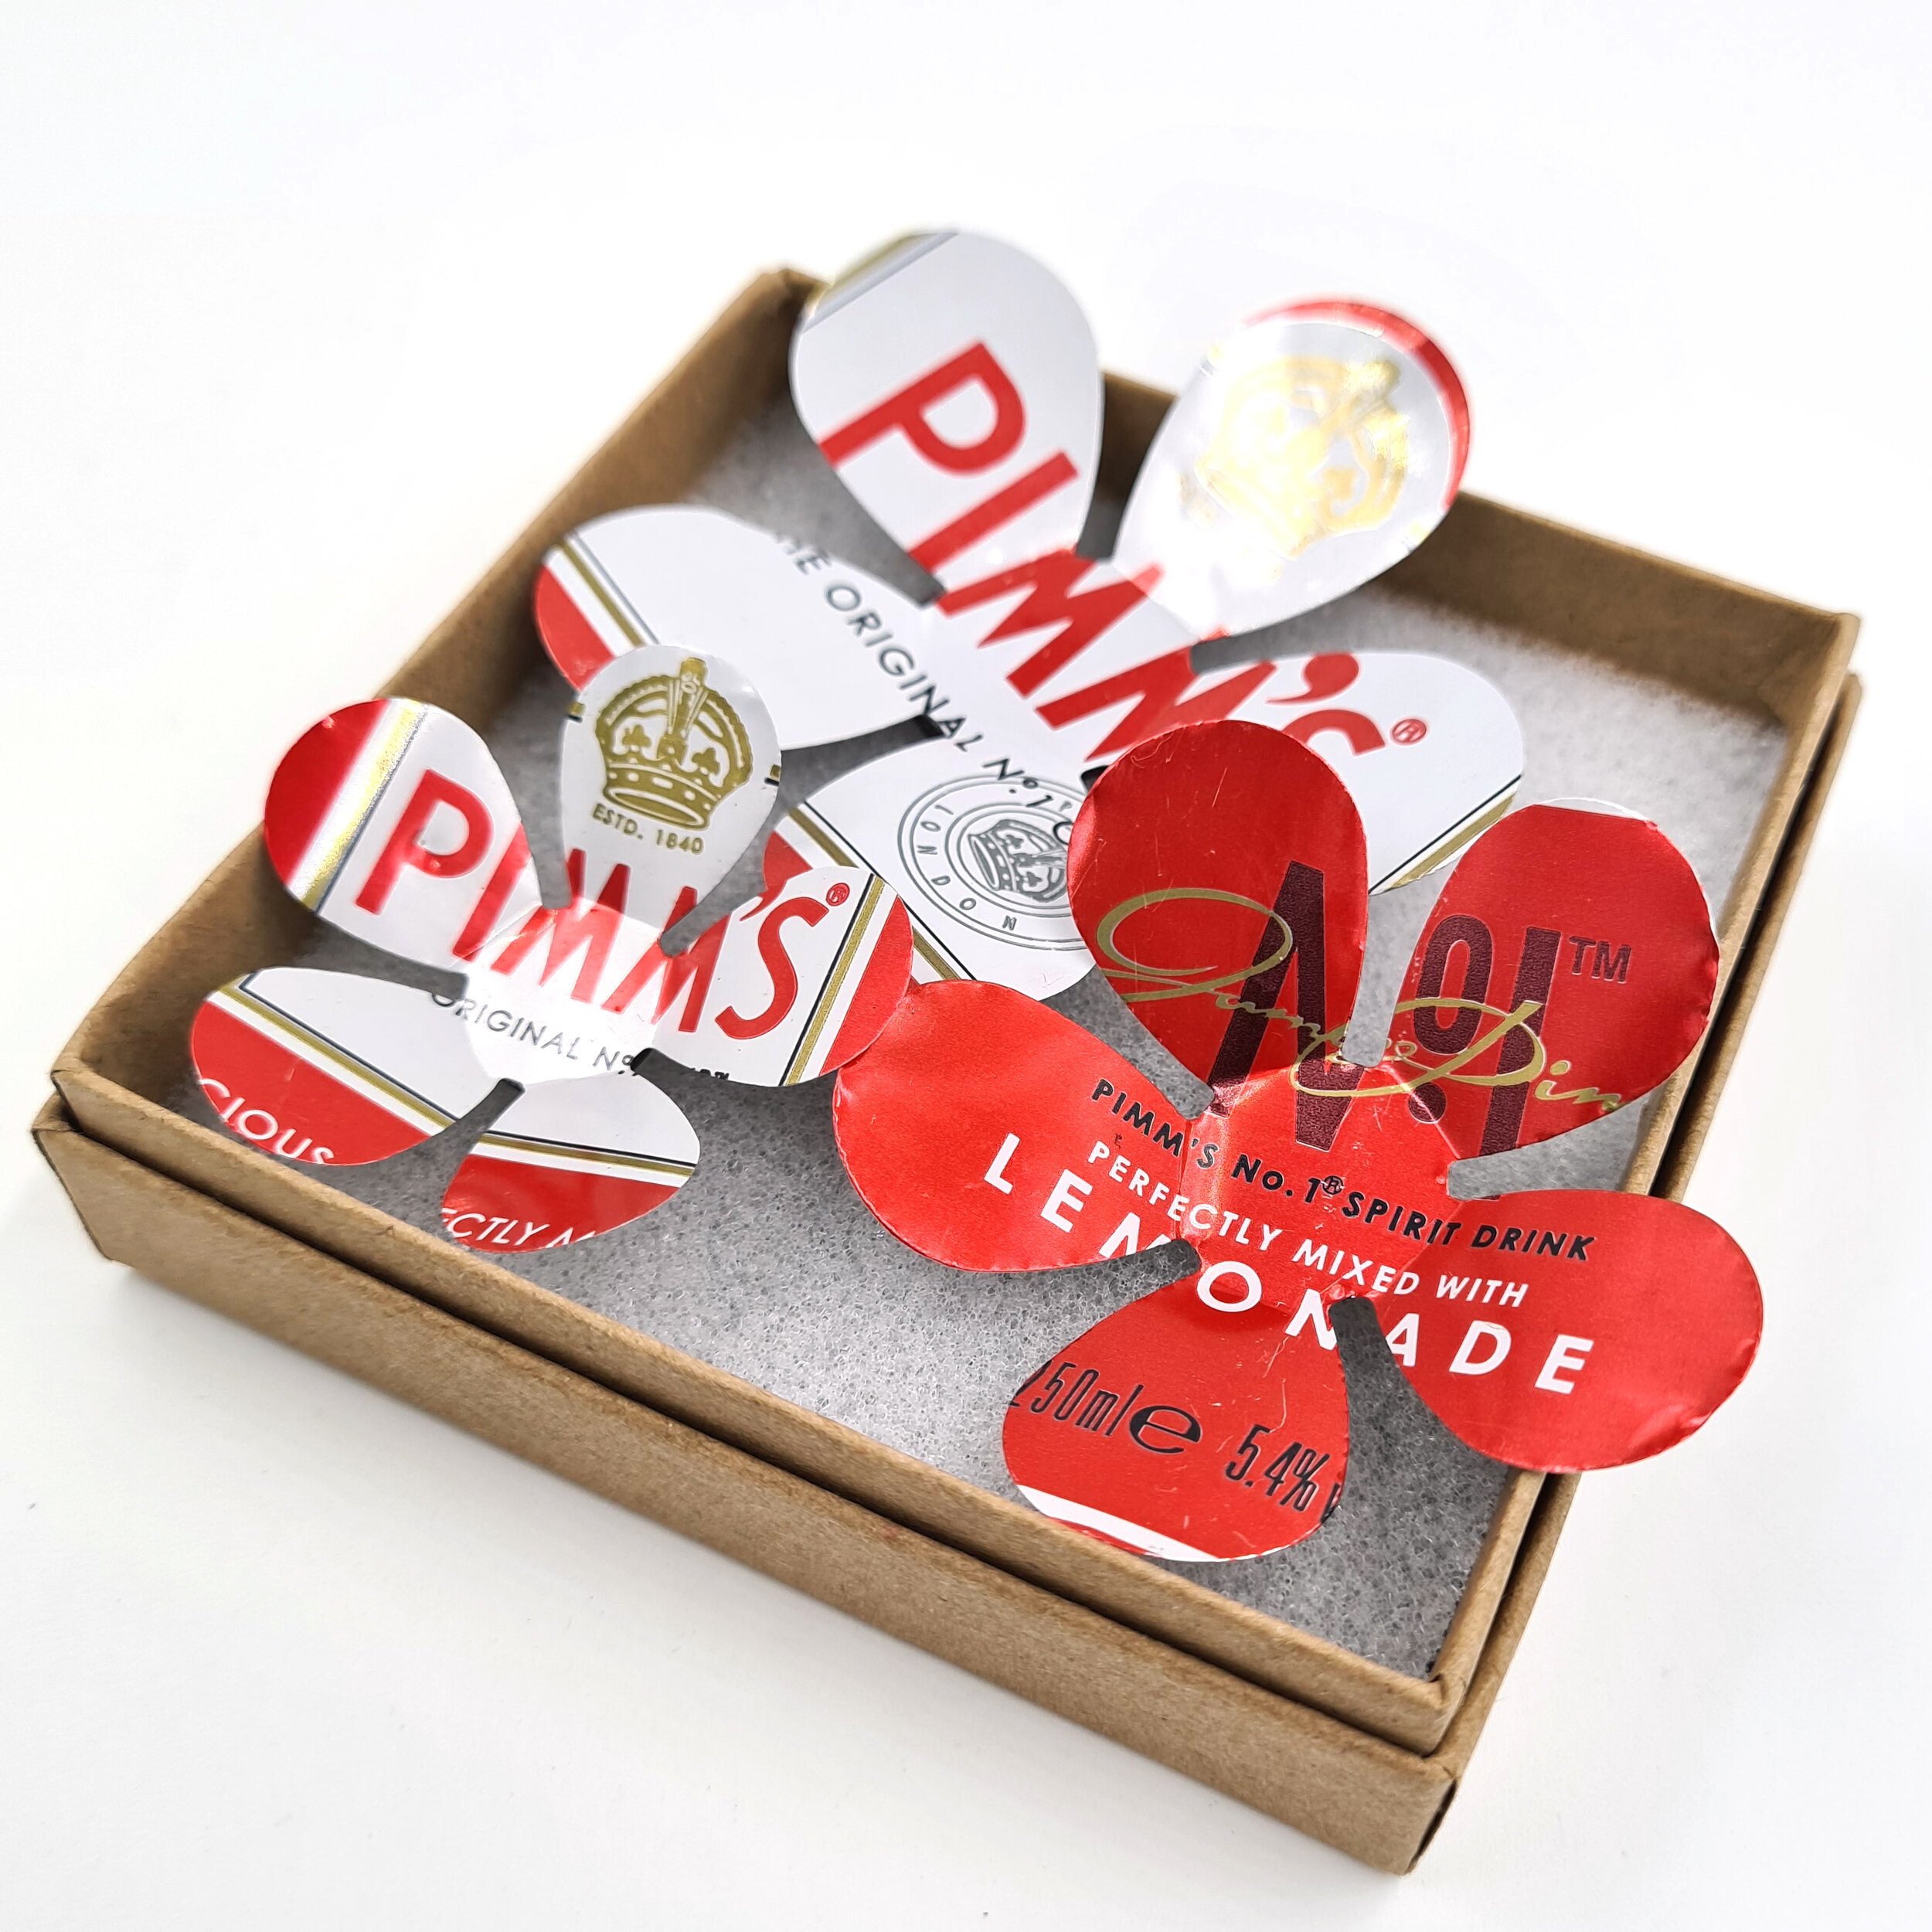 Pimm's red and white sustainable tin Can Flower Magnets in box